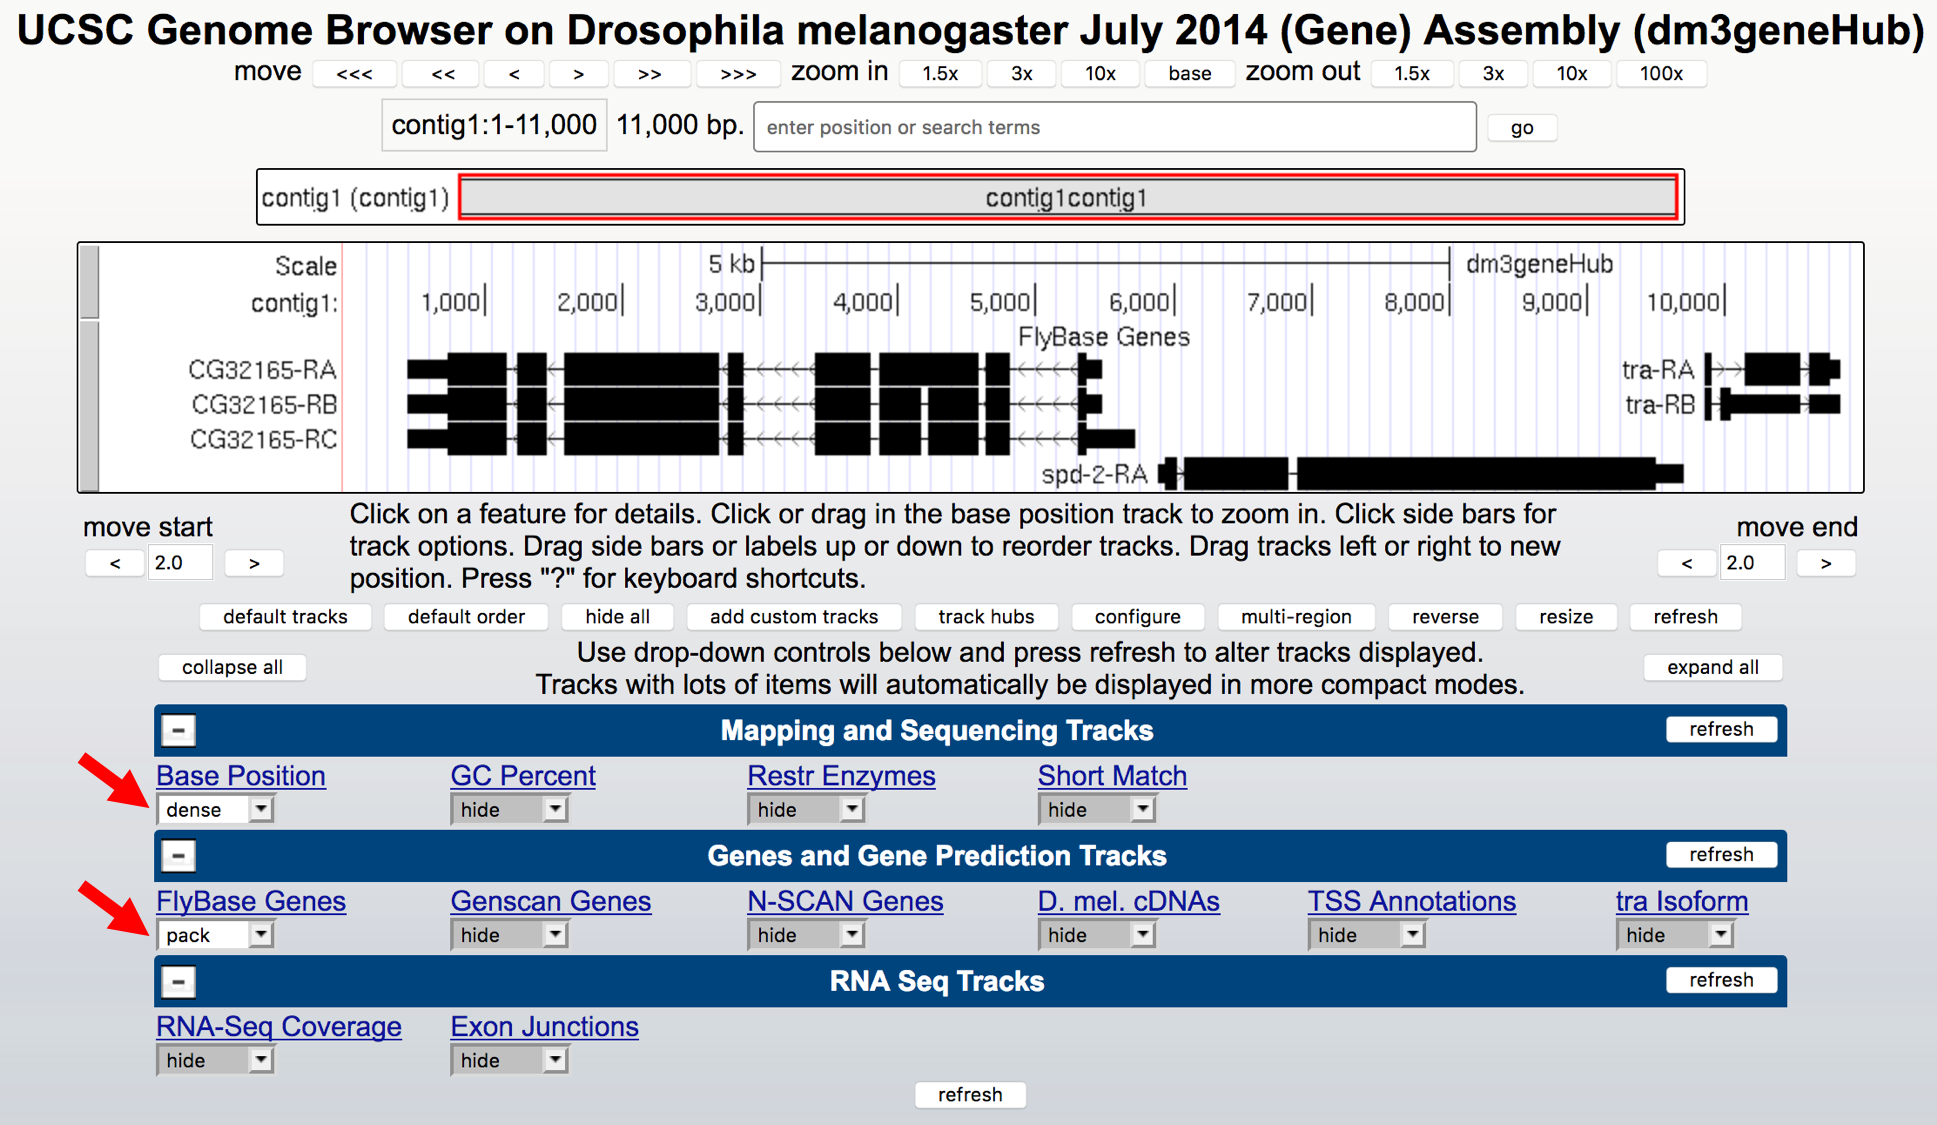 Display settings for the "July 2014 (Gene)" assembly